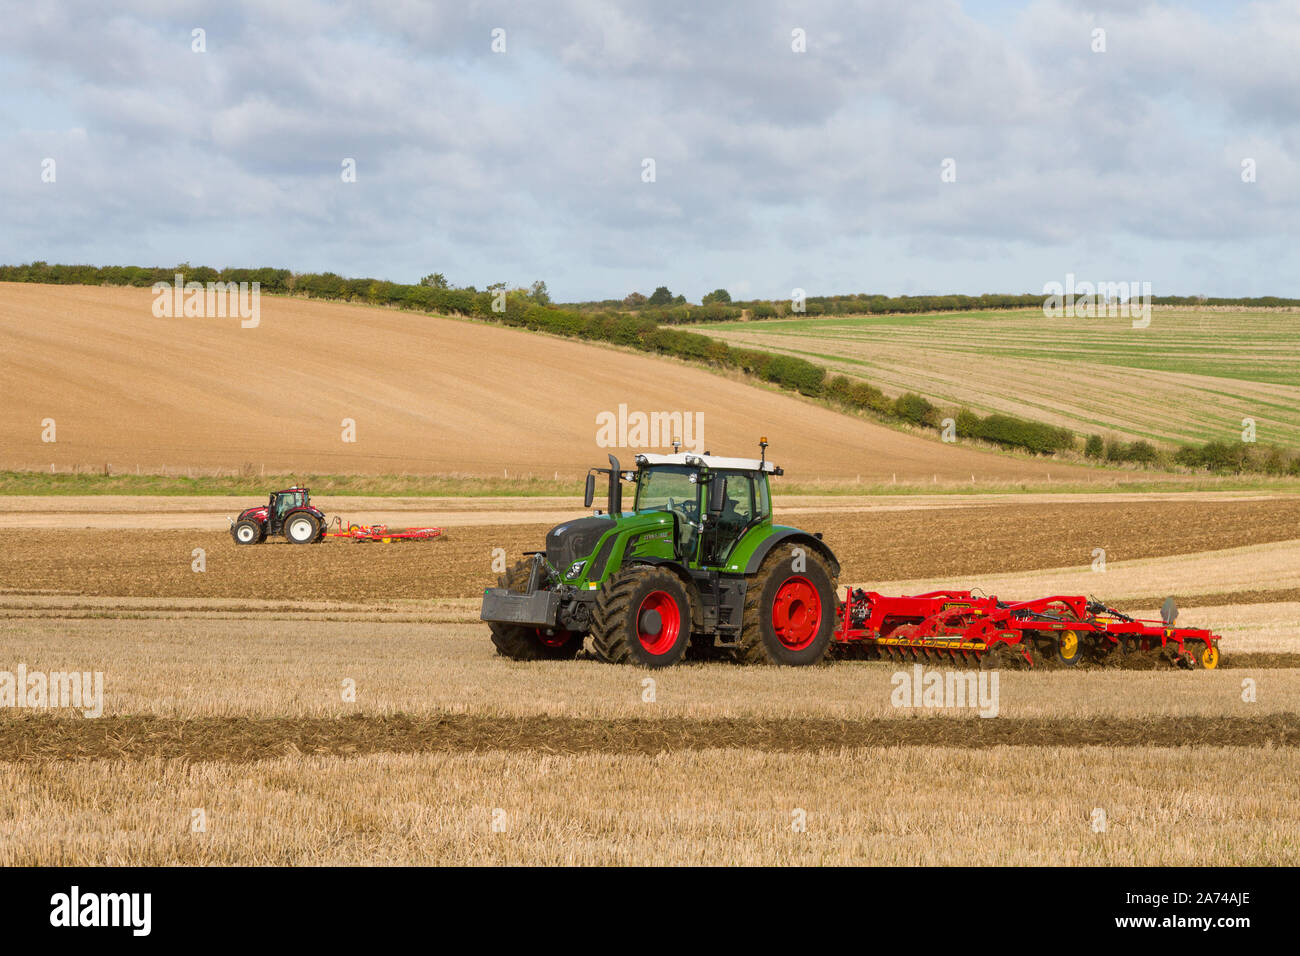 A large modern green Fendt tractor cultivating fields at a ploughing match near Ipsden on the edge of the Chilterns with blue sky and Cumulus clouds Stock Photo